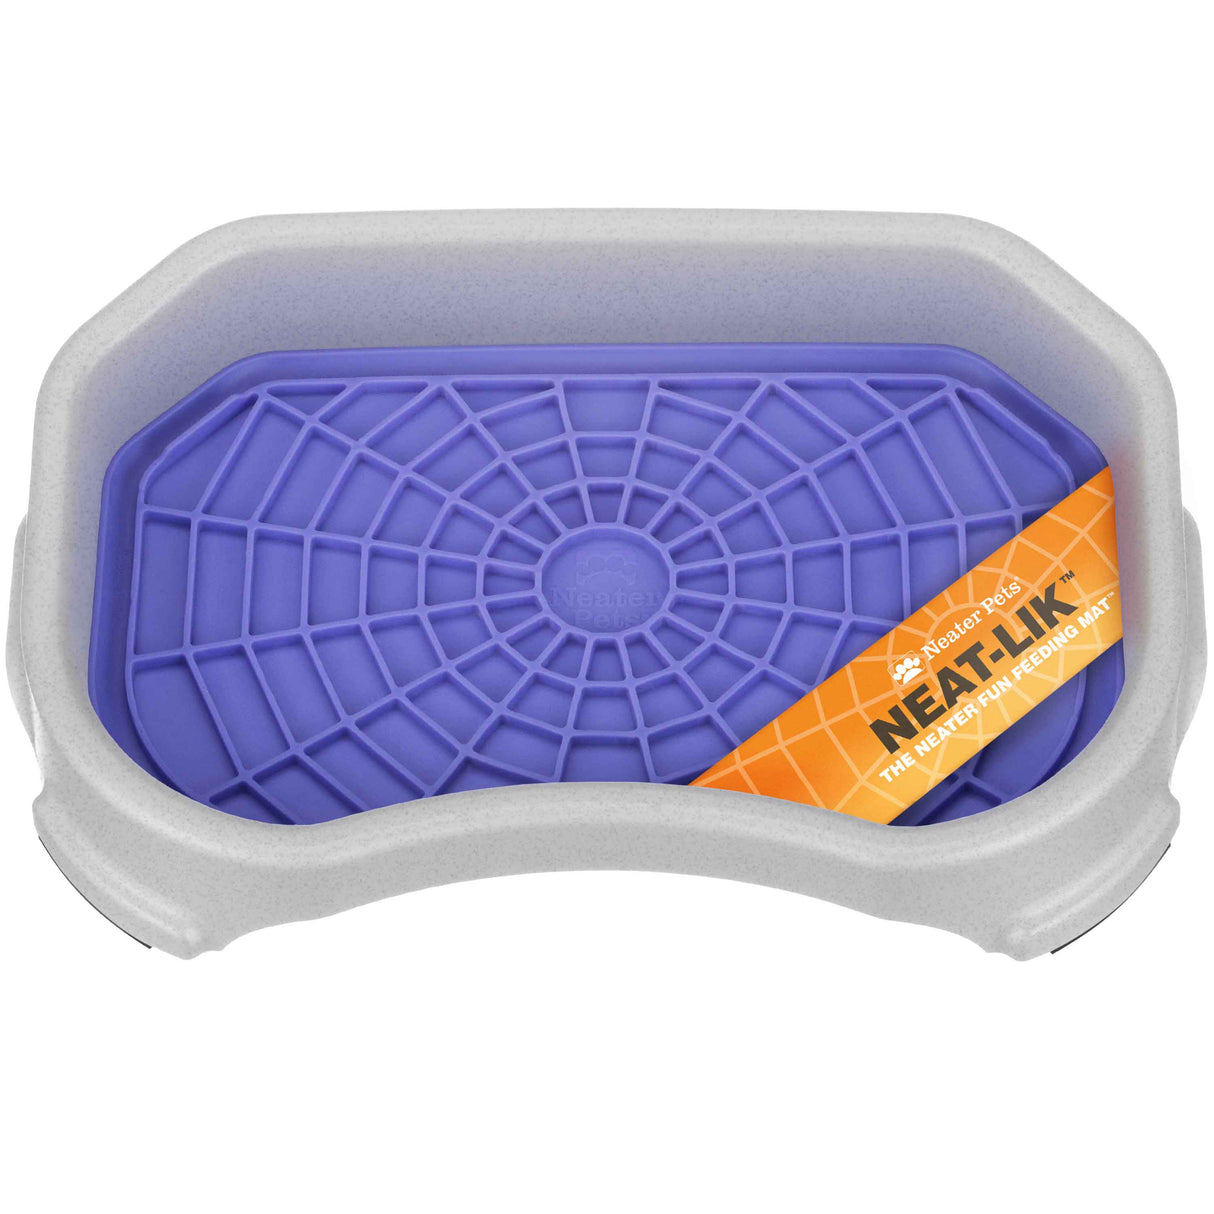 Neat-Lik Slow Feed Licking Mat with Mess-Proof Tray